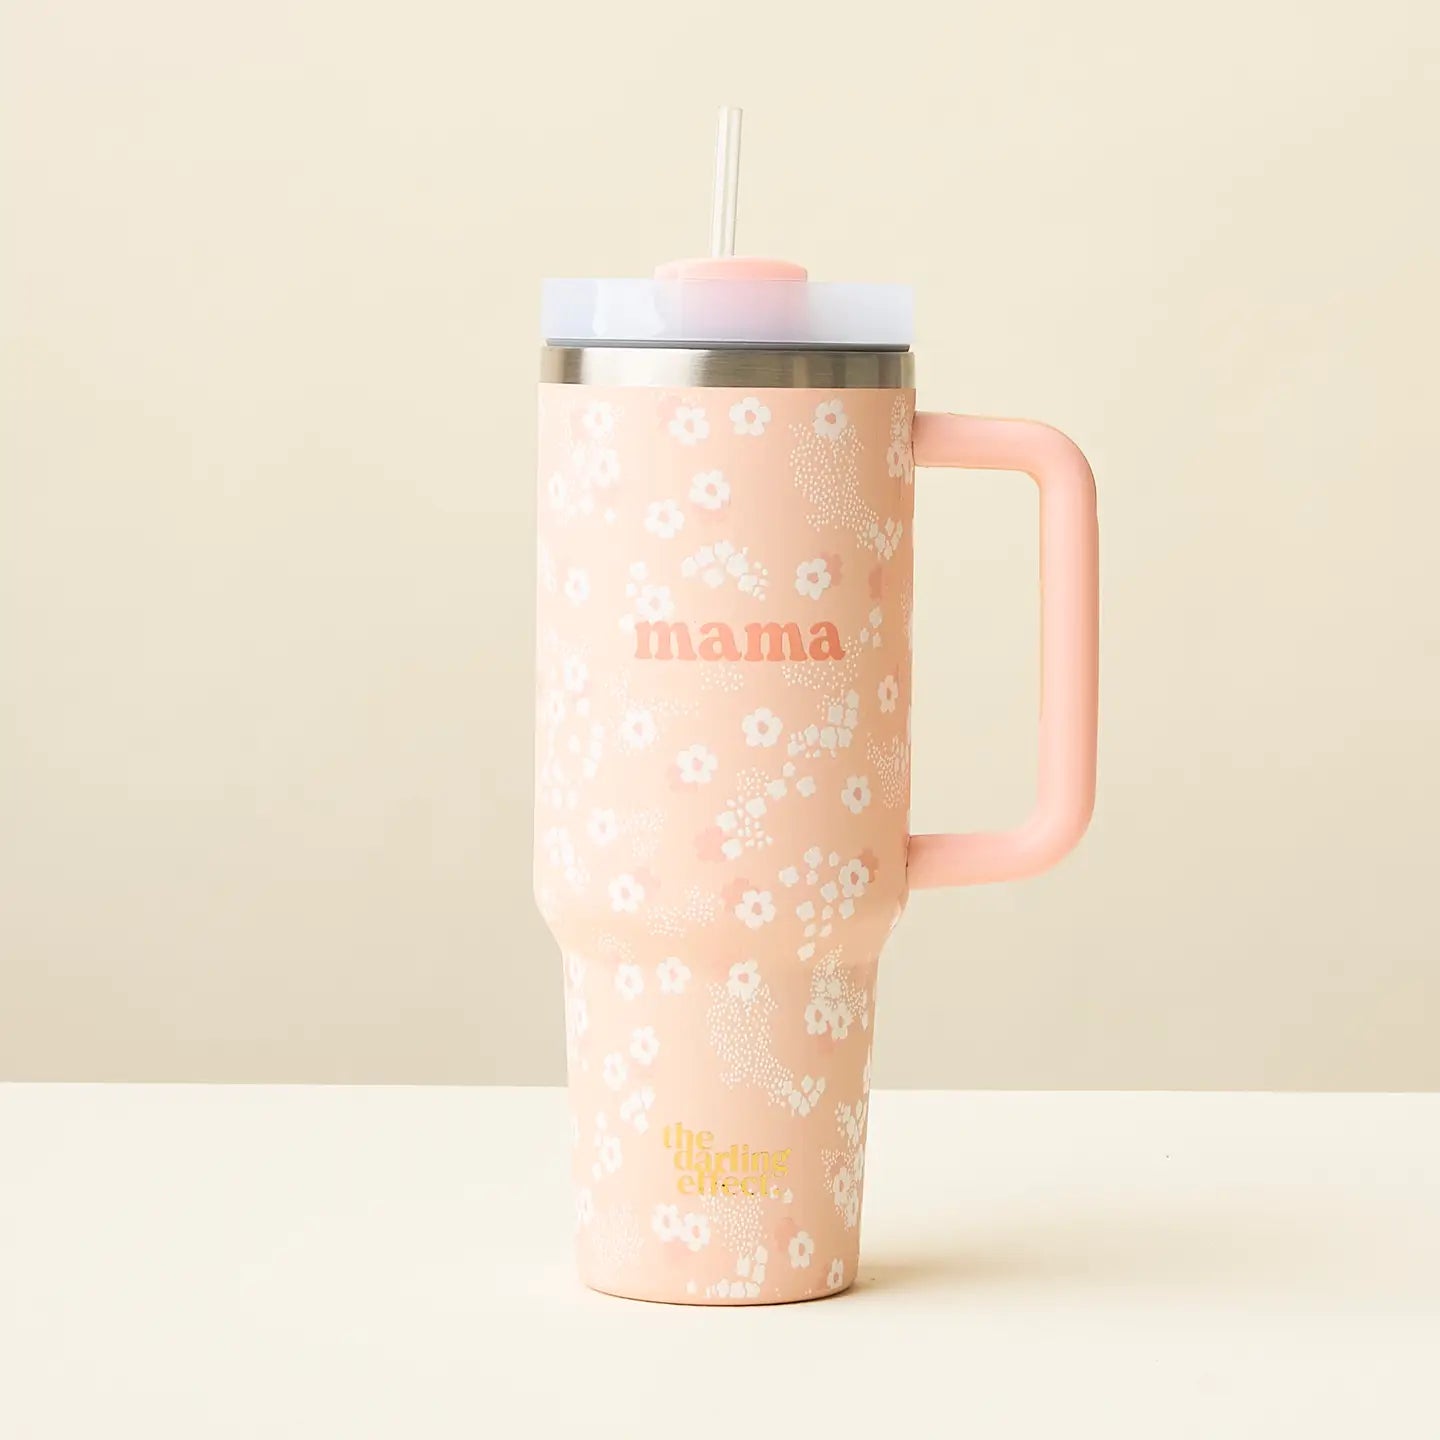 The Darling Effect Tumble / Peach Floral "mama"